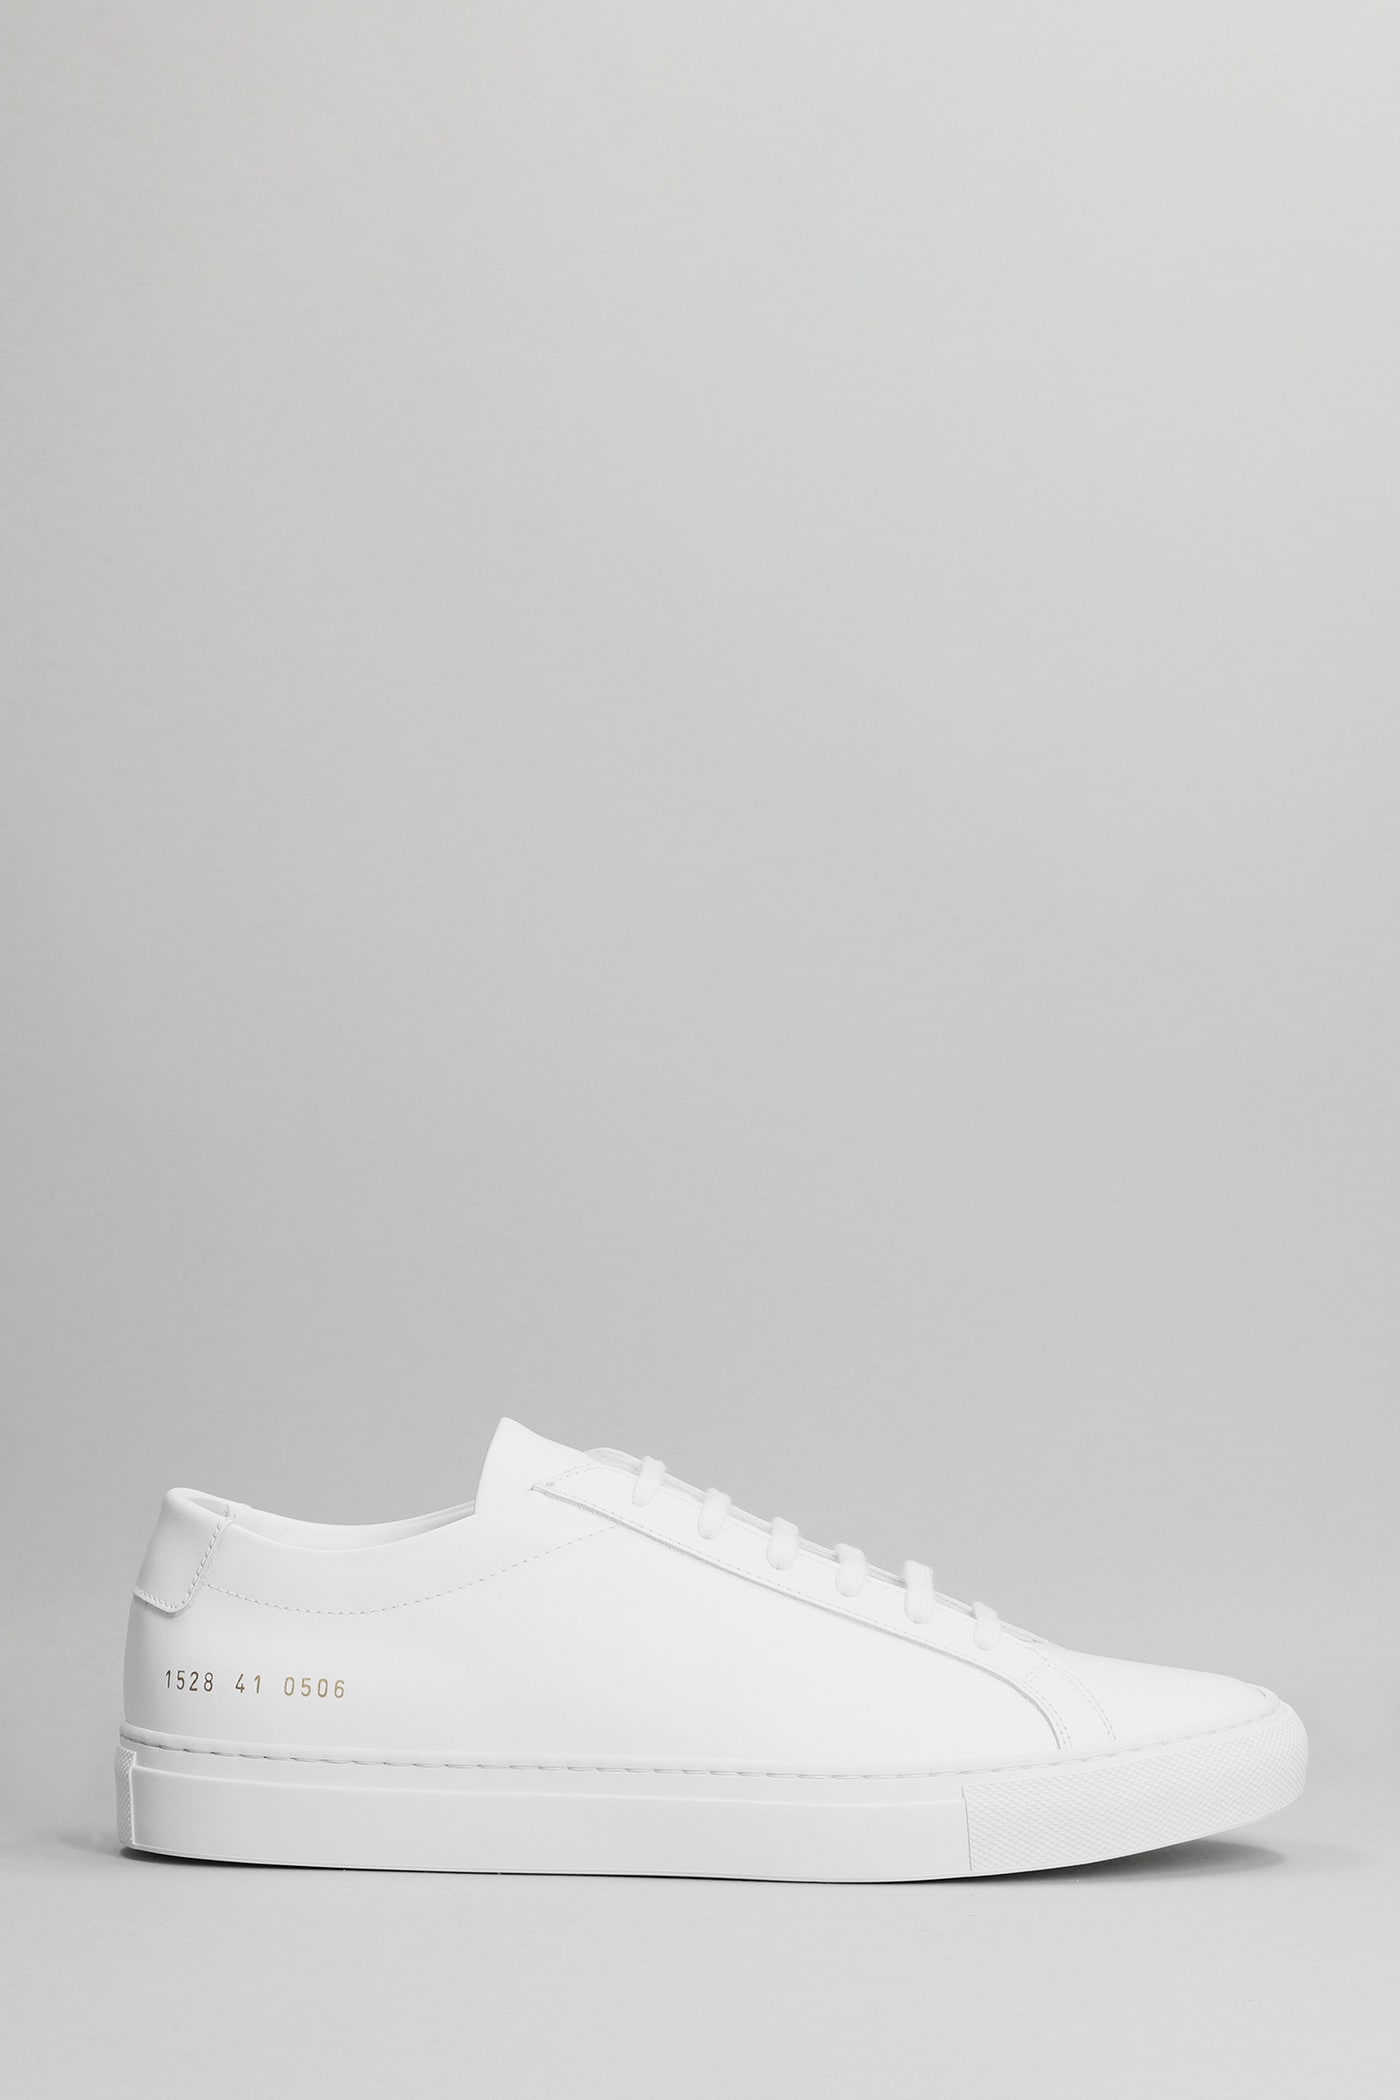 Common Projects Original Achilles Sneakers In White Leather